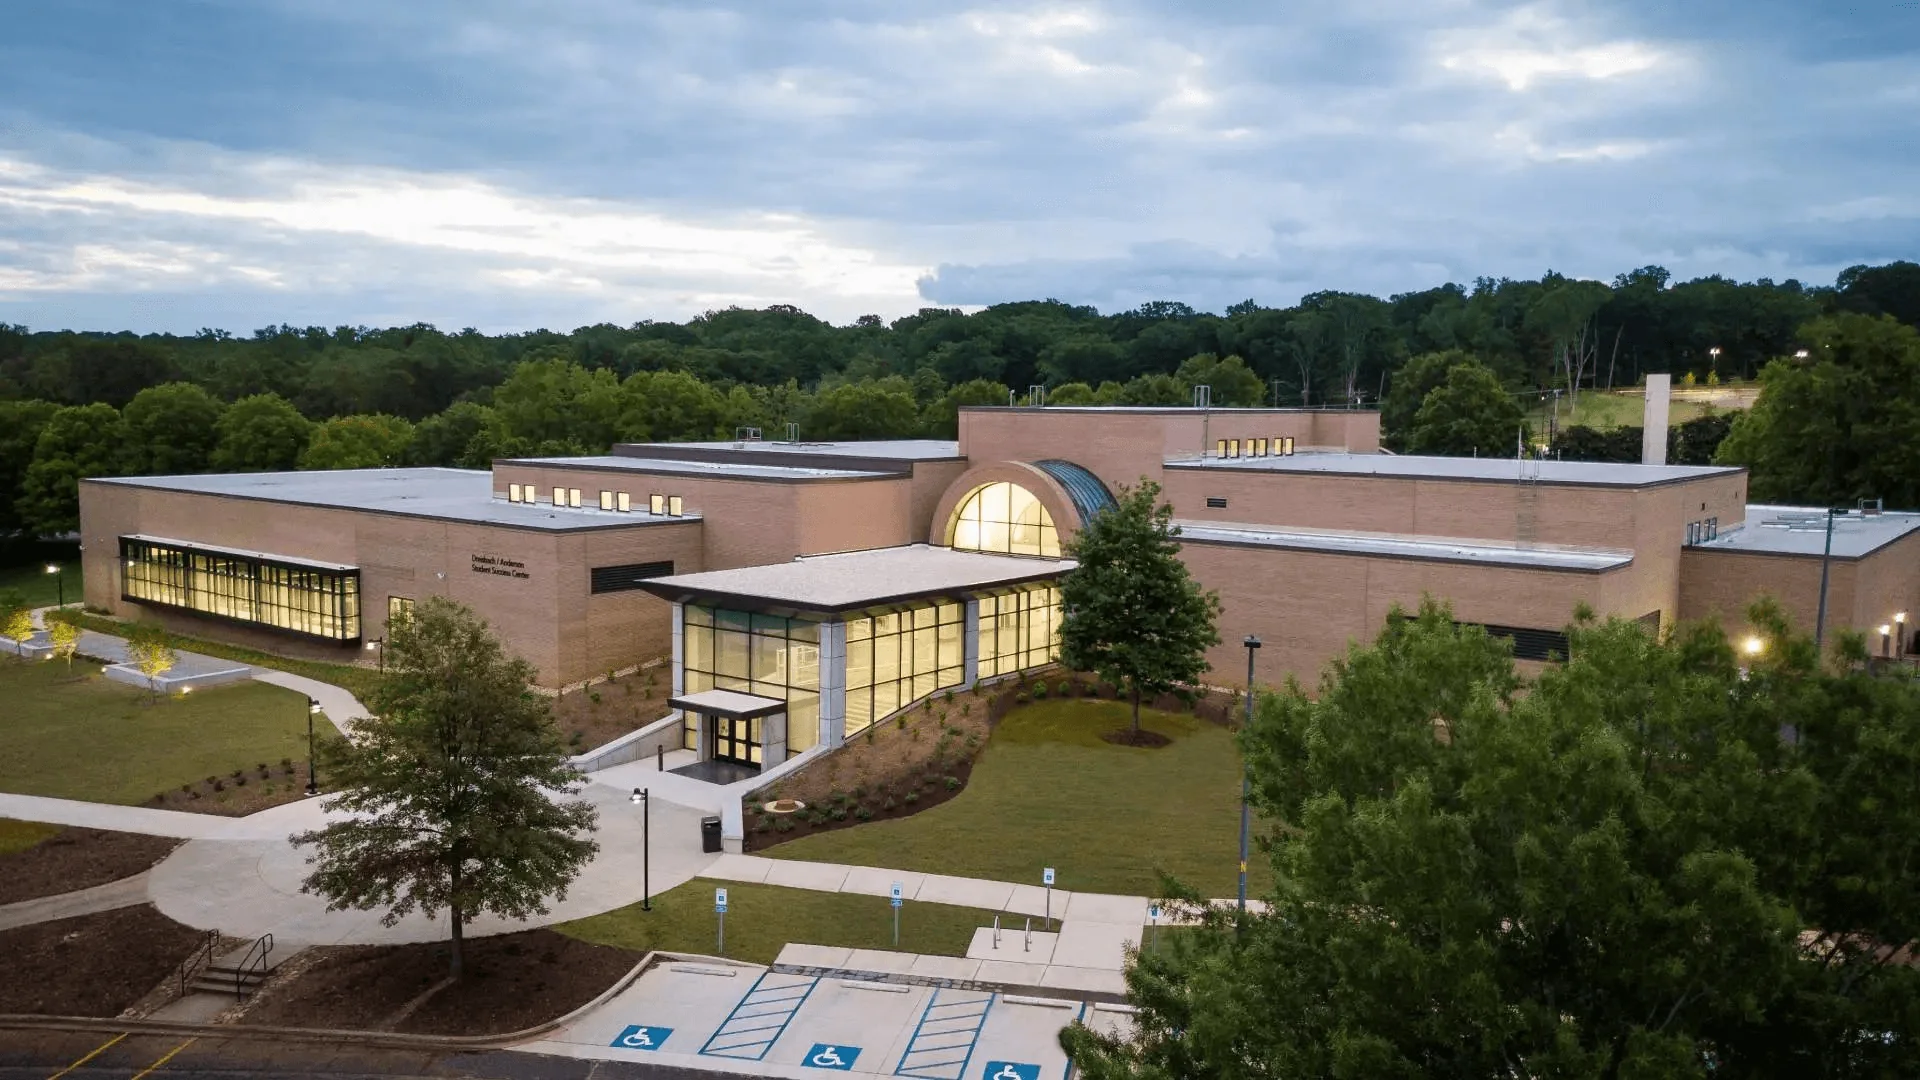 South Carolina’s Greenville Technical College Selects YuJa Enterprise Video Platform to Enhance Learning Campuswide